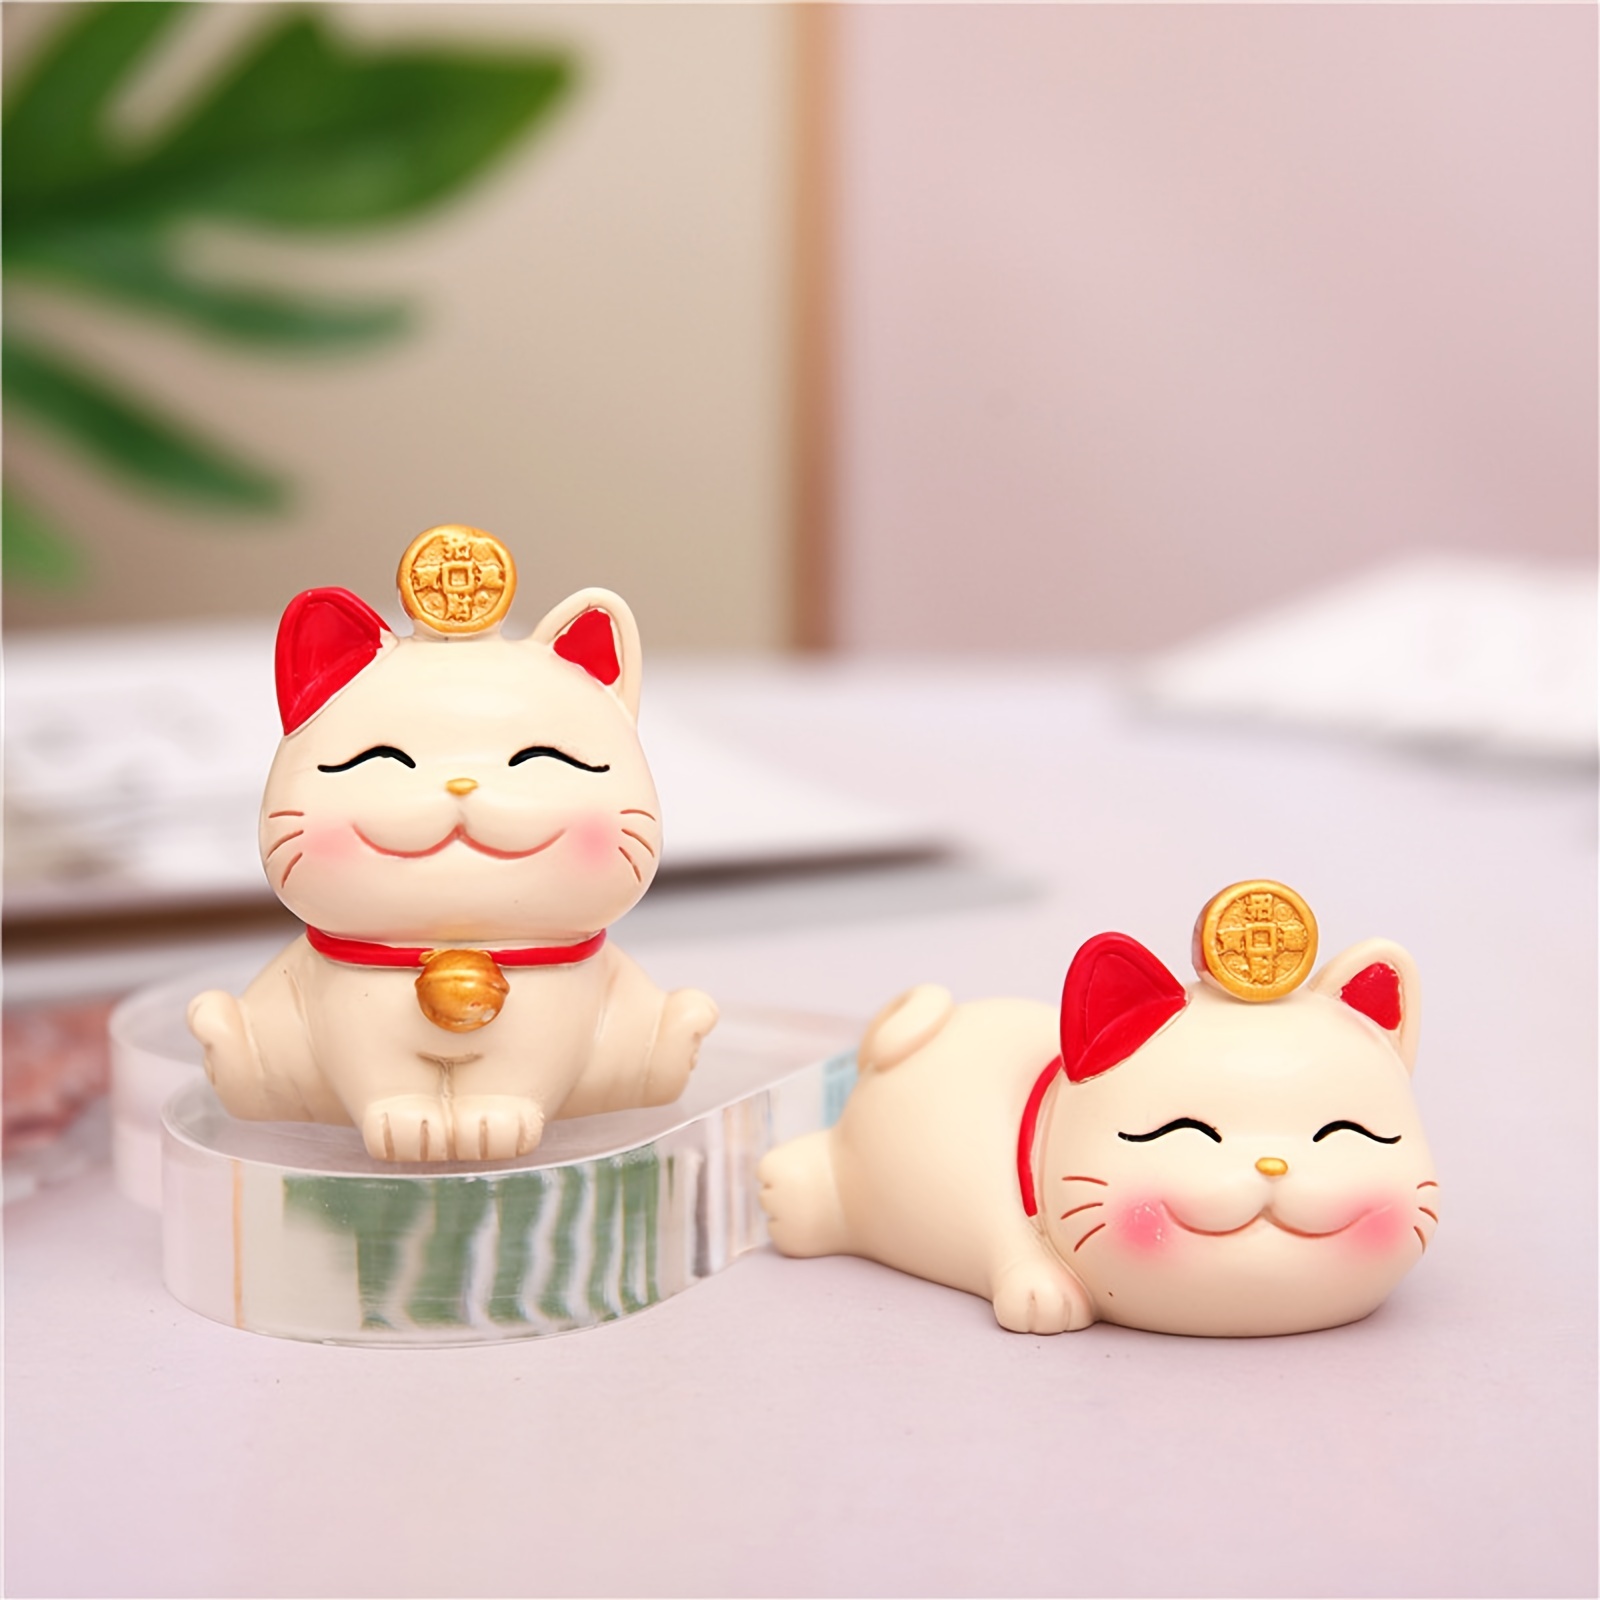 Flying Wish Paper Lucky Cats Mini Kit